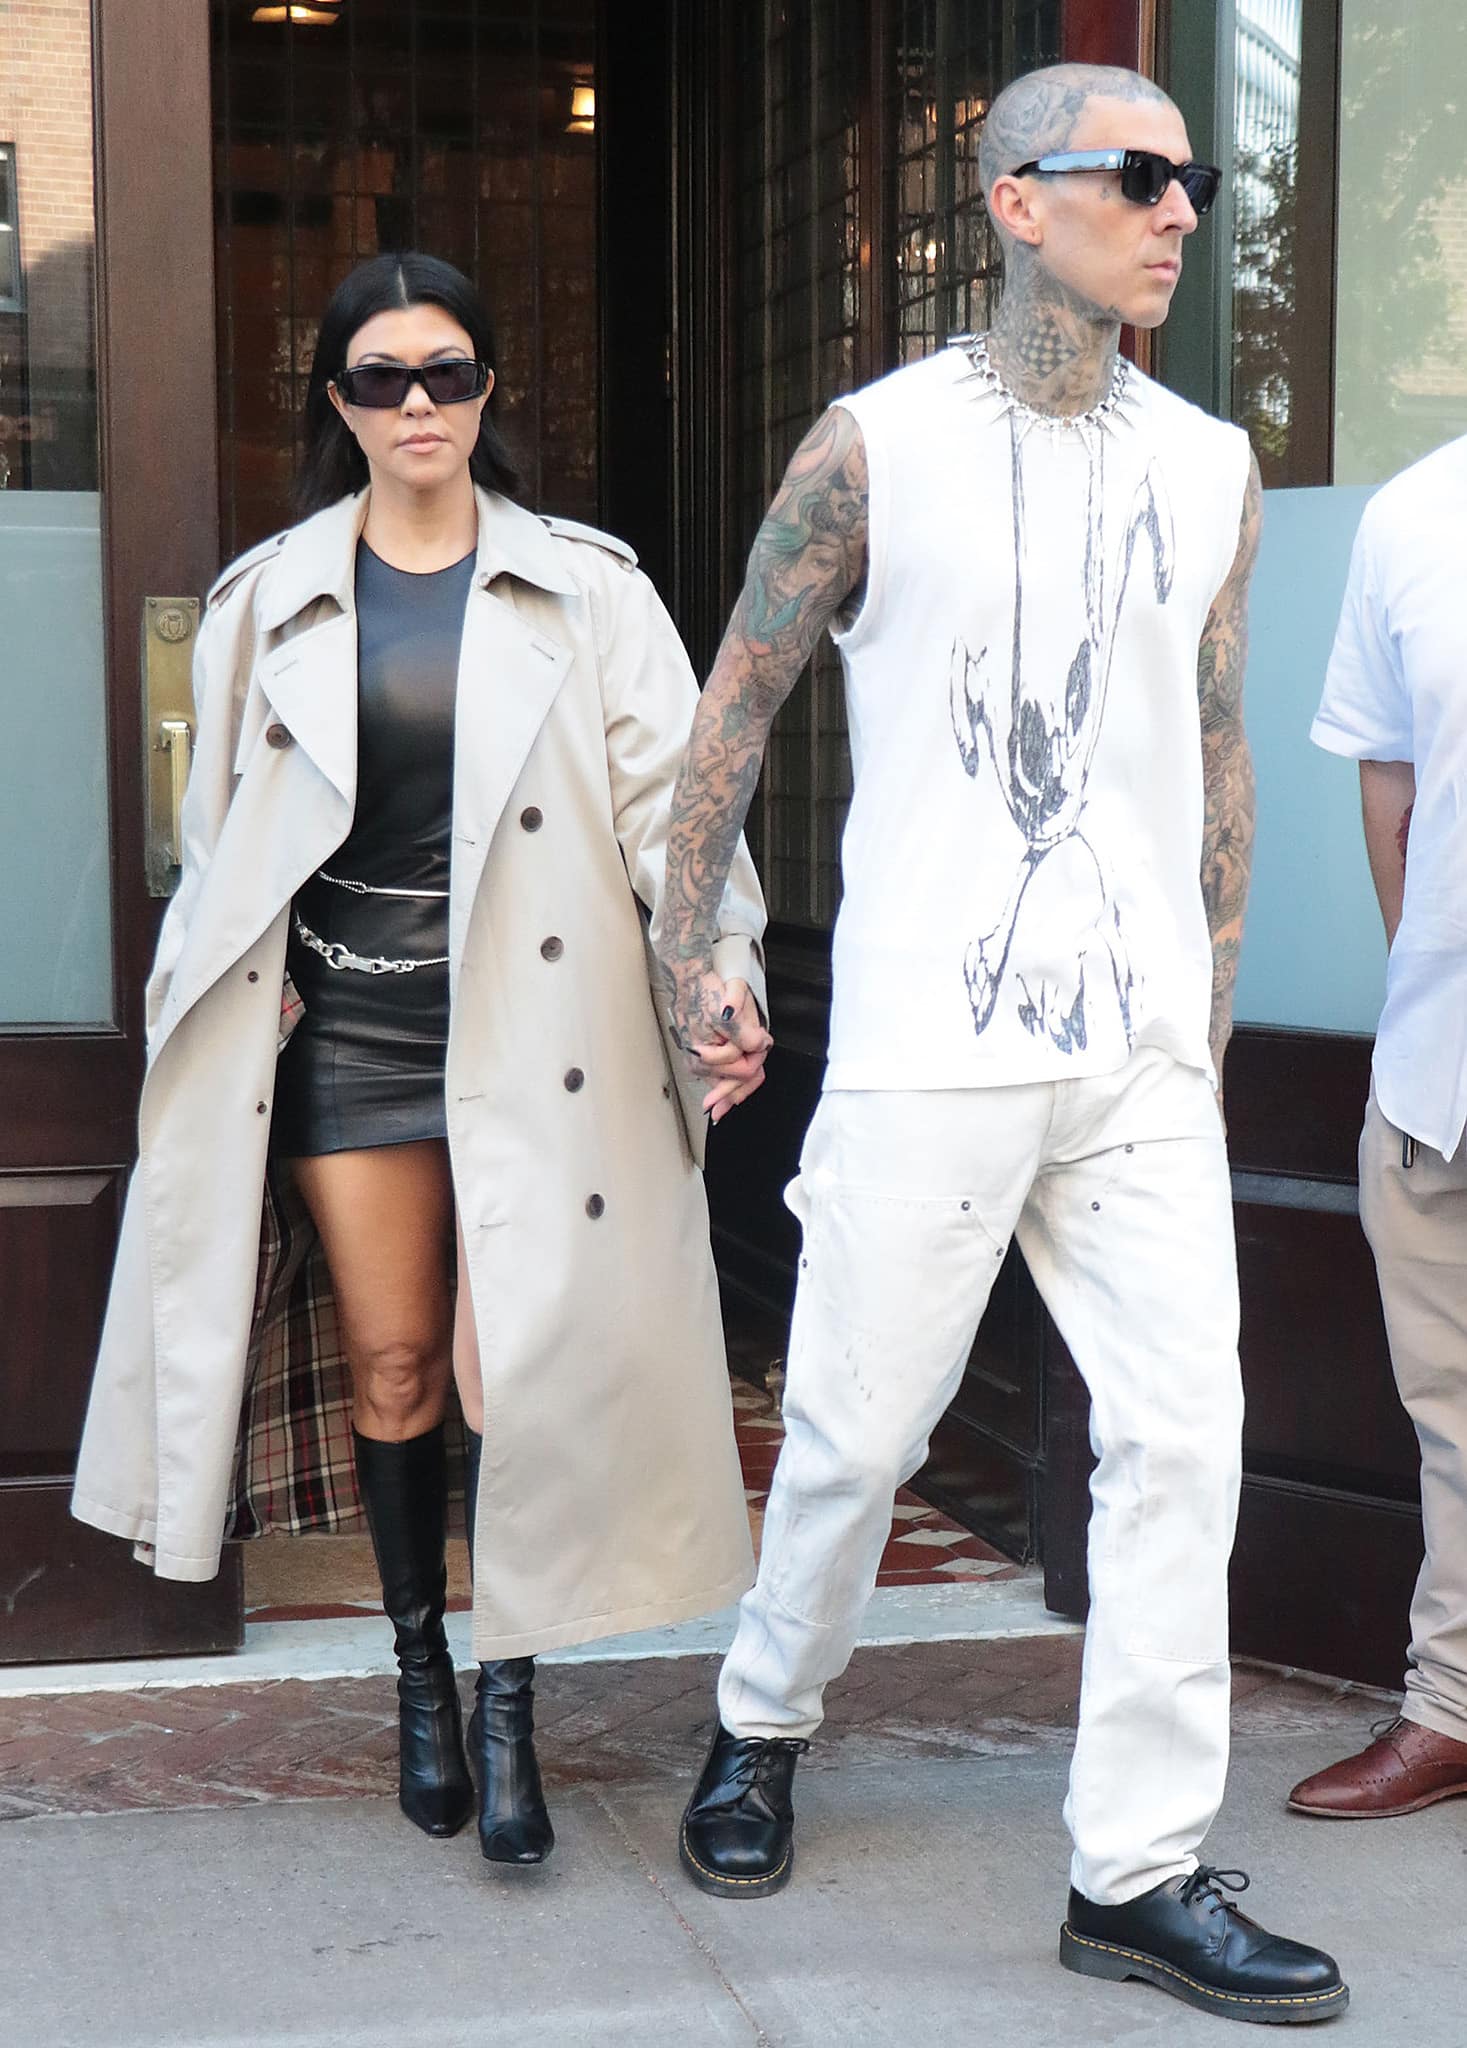 Kourtney Kardashian wears a leather mini dress with a Burberry Westminster Heritage trench coat while Travis opts for a muscle tee with cream-colored jeans